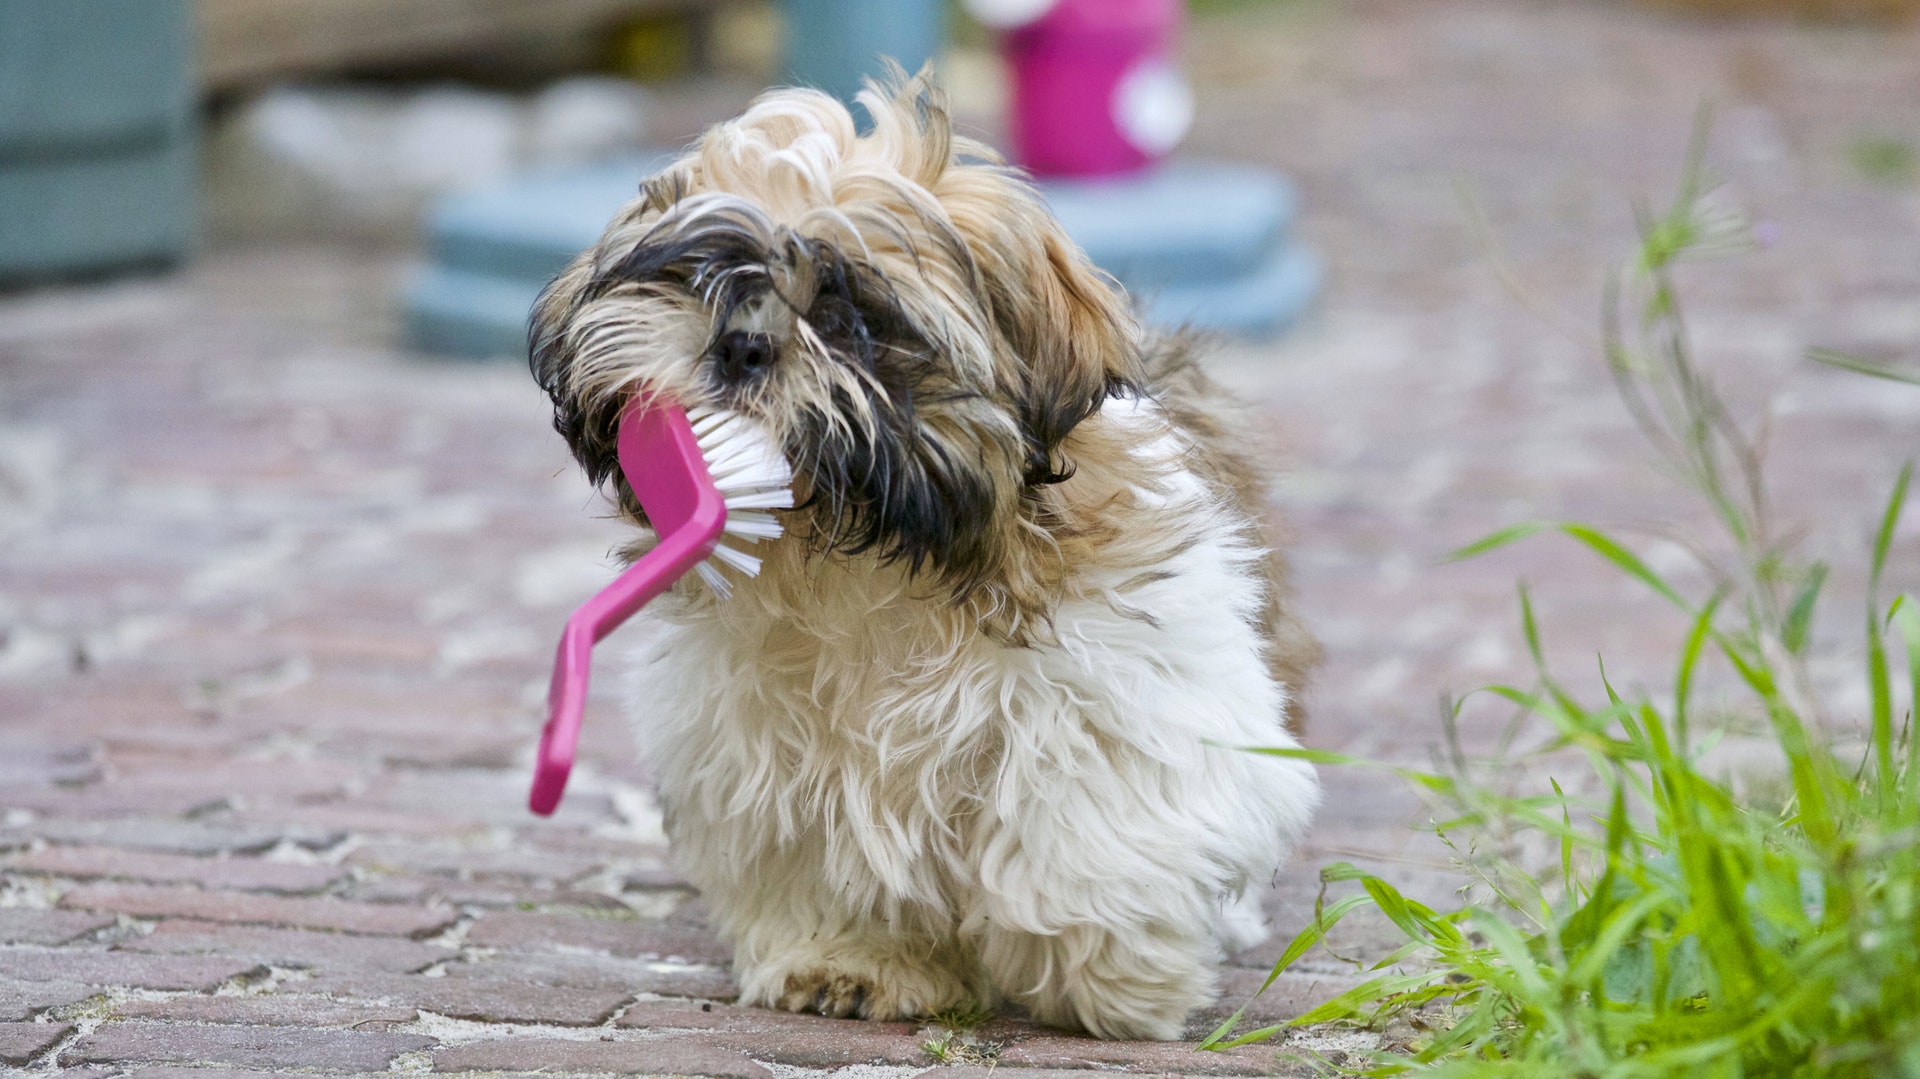 dog holding a brush in its mouth